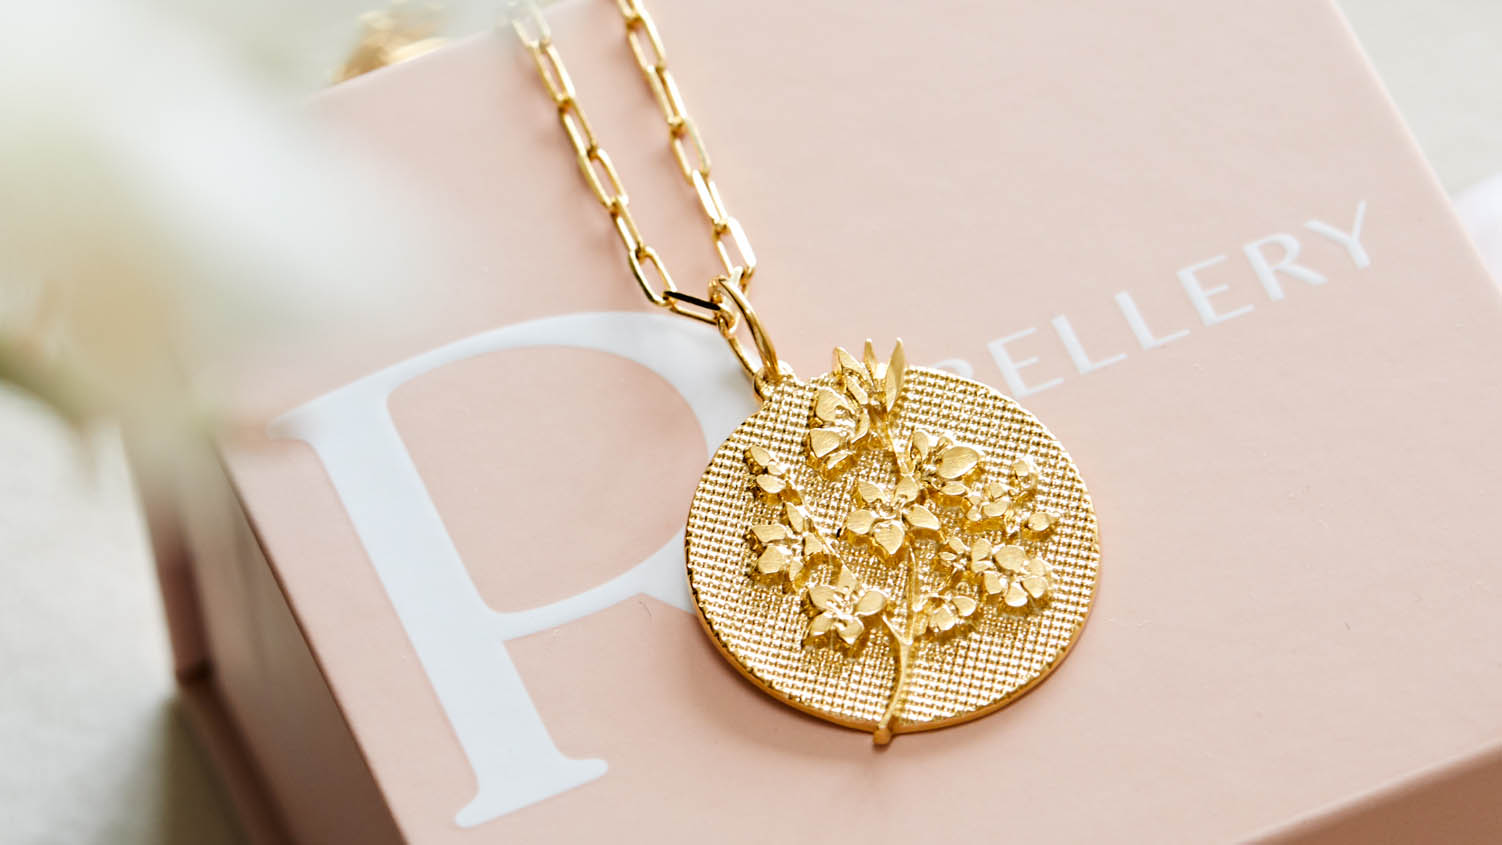 Flower Jewelry, find out our new Flower Power Collection